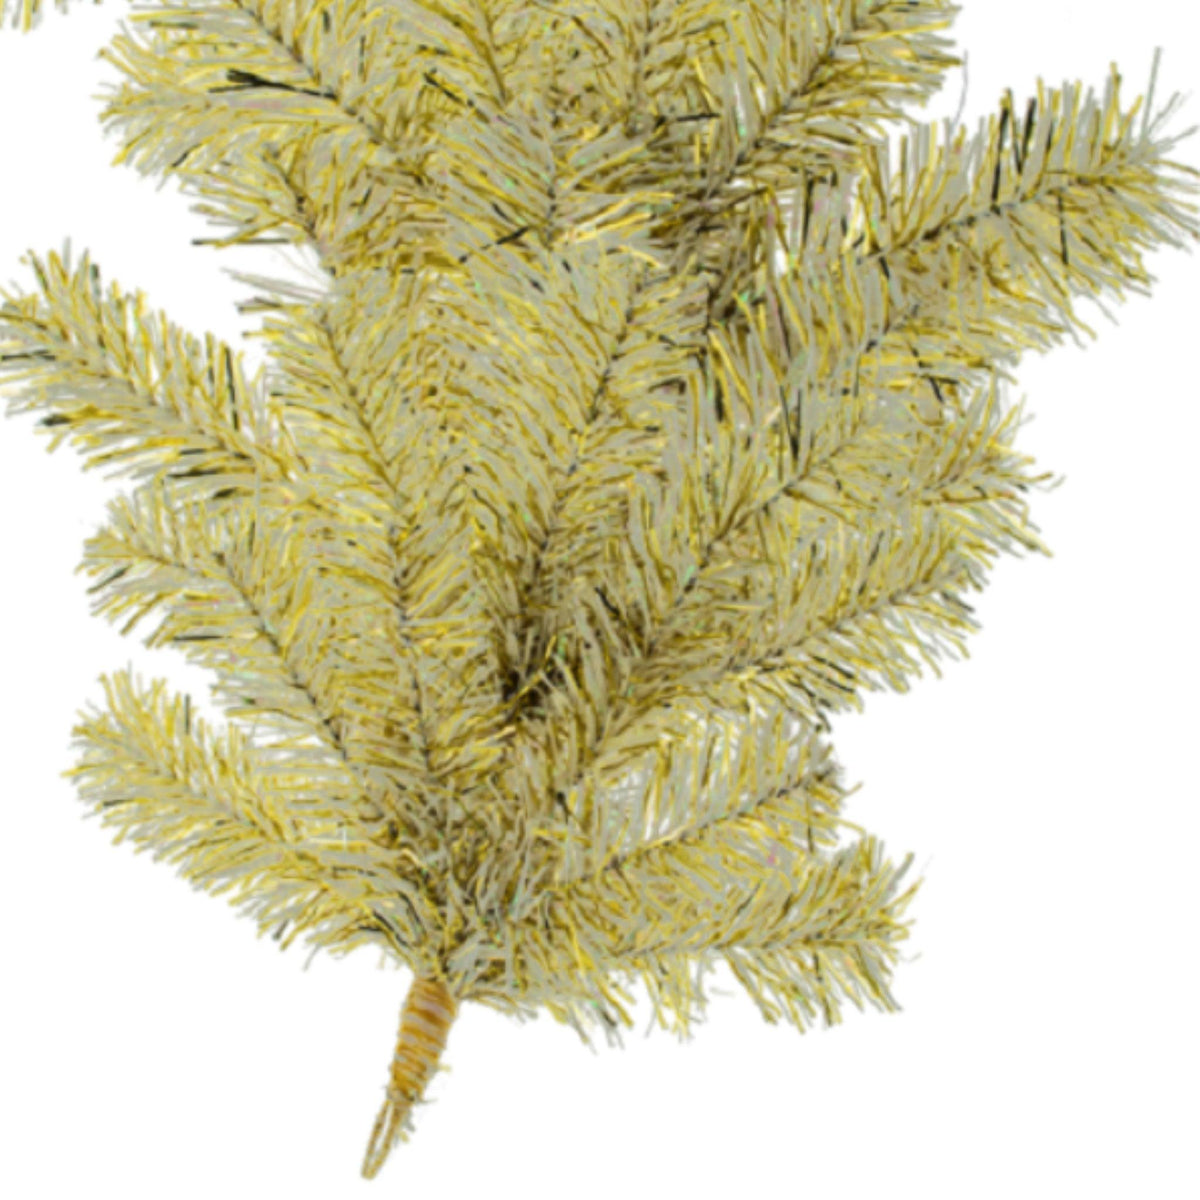 Shop for Lee Display's brand new 6FT Shiny Gold and Metallic Silver Tinsel Brush Garlands on sale at leedisplay.com.  End section with wire